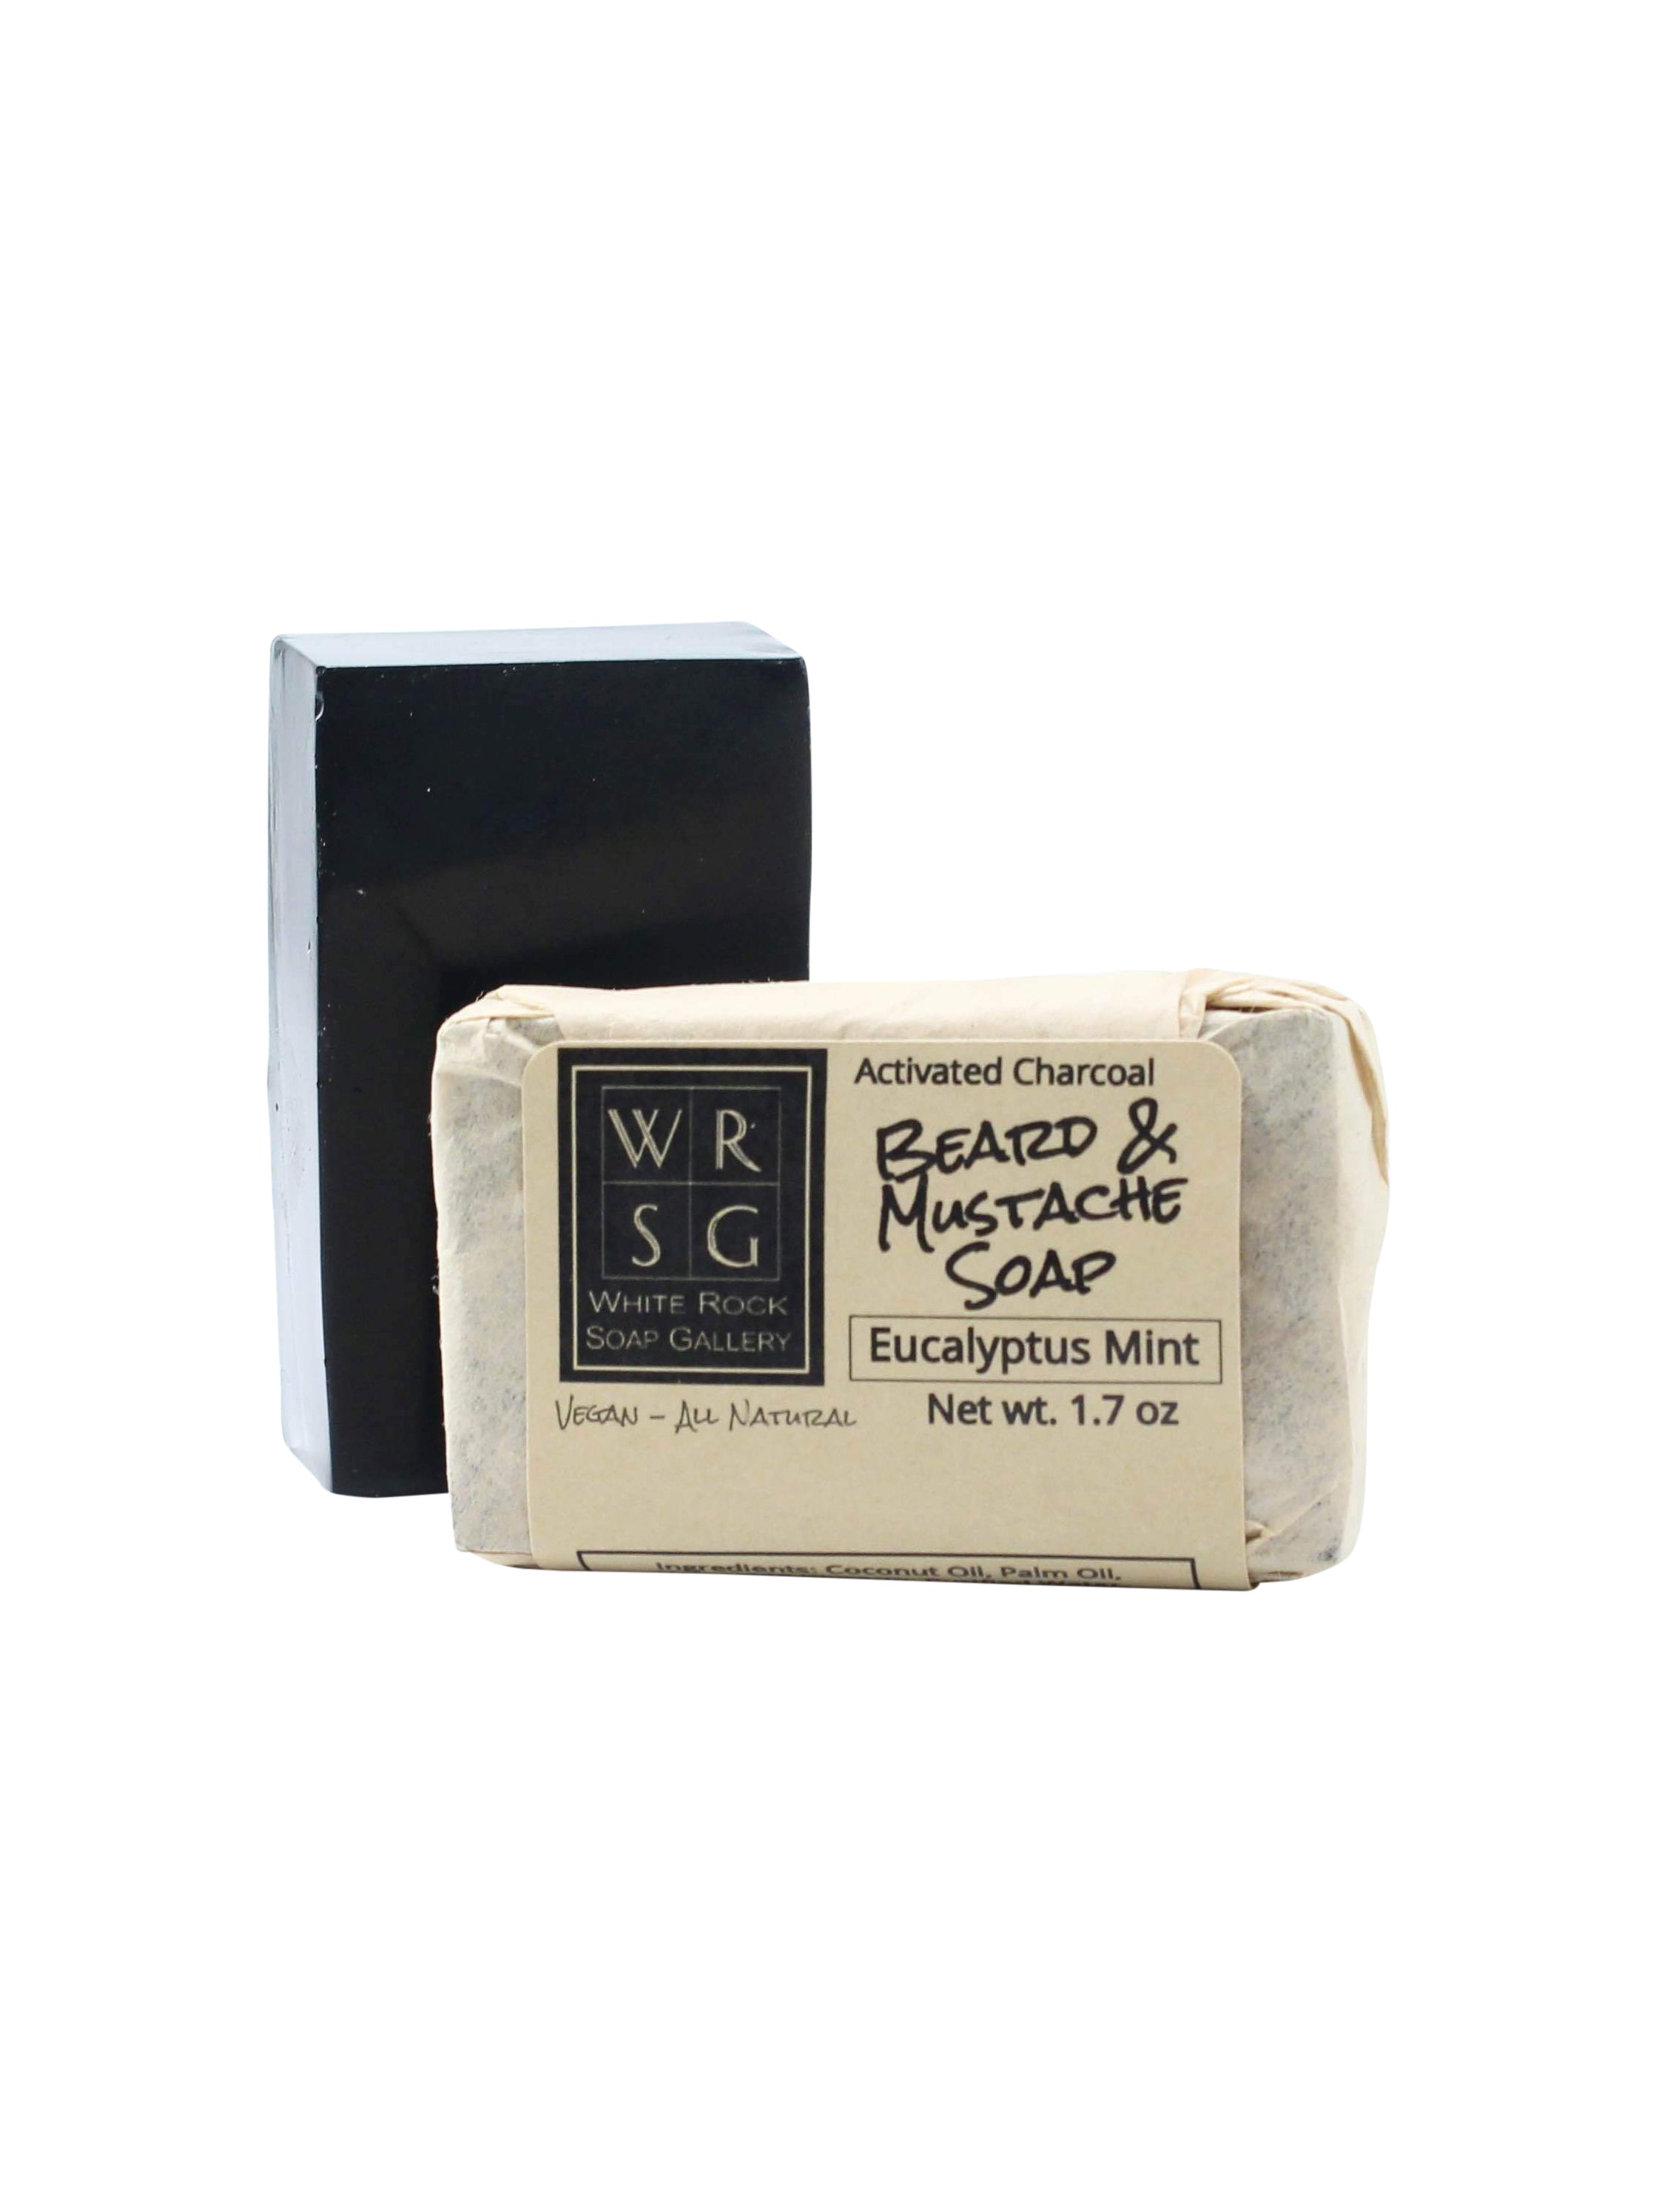 Activated Charcoal Face & Beard Soap Bar